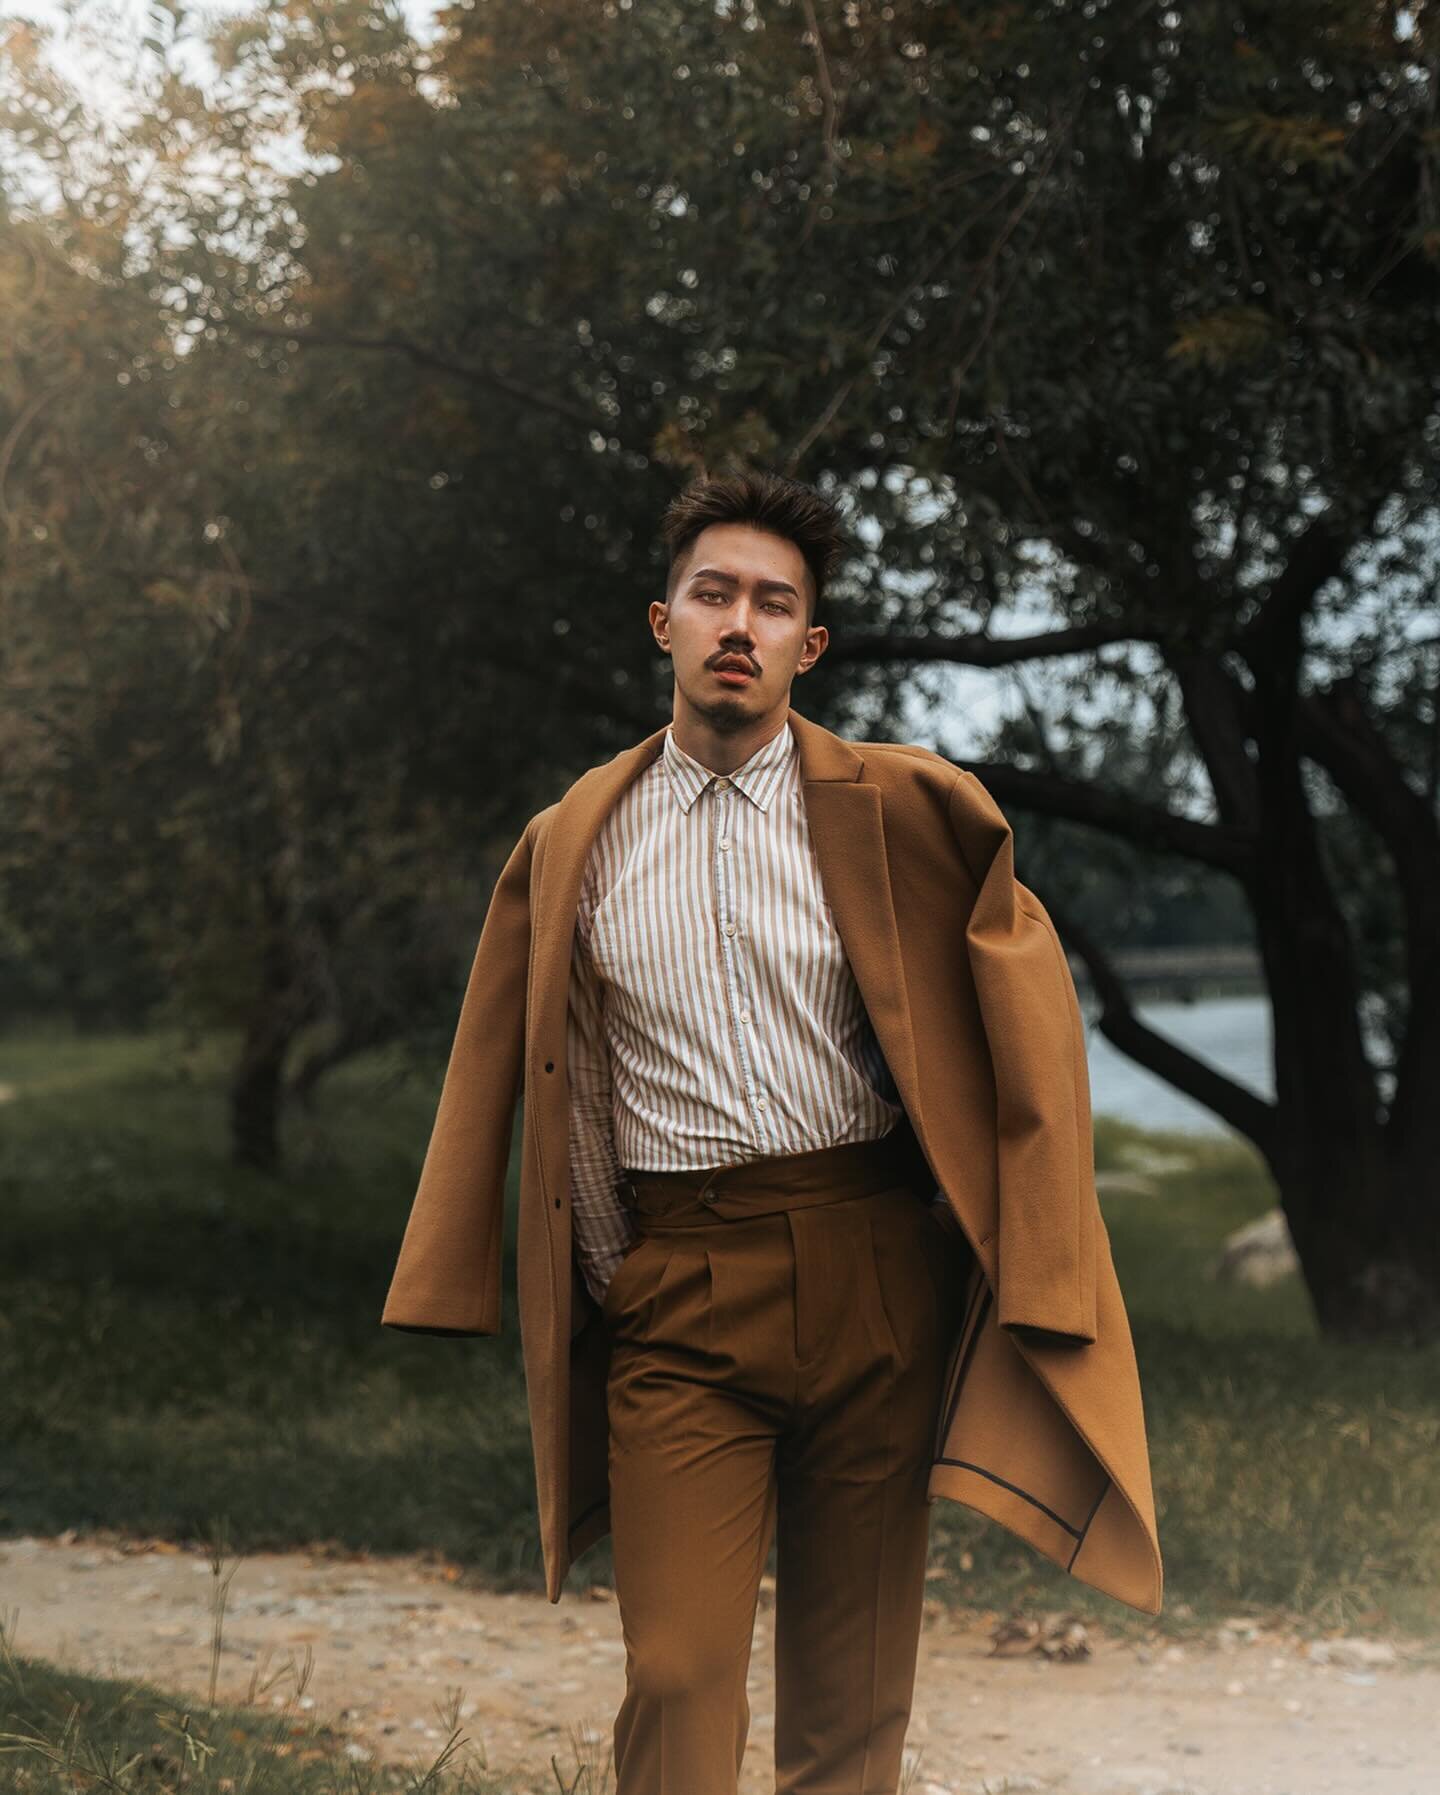 My favorite brown season with coat 🍂🤎🧡

Finally, the temperature has dropped here in my city&mdash;more like fall than summer these days. I finally got to switch my wardrobe to a brown color, especially for trousers and coats.  Listening to Ed She